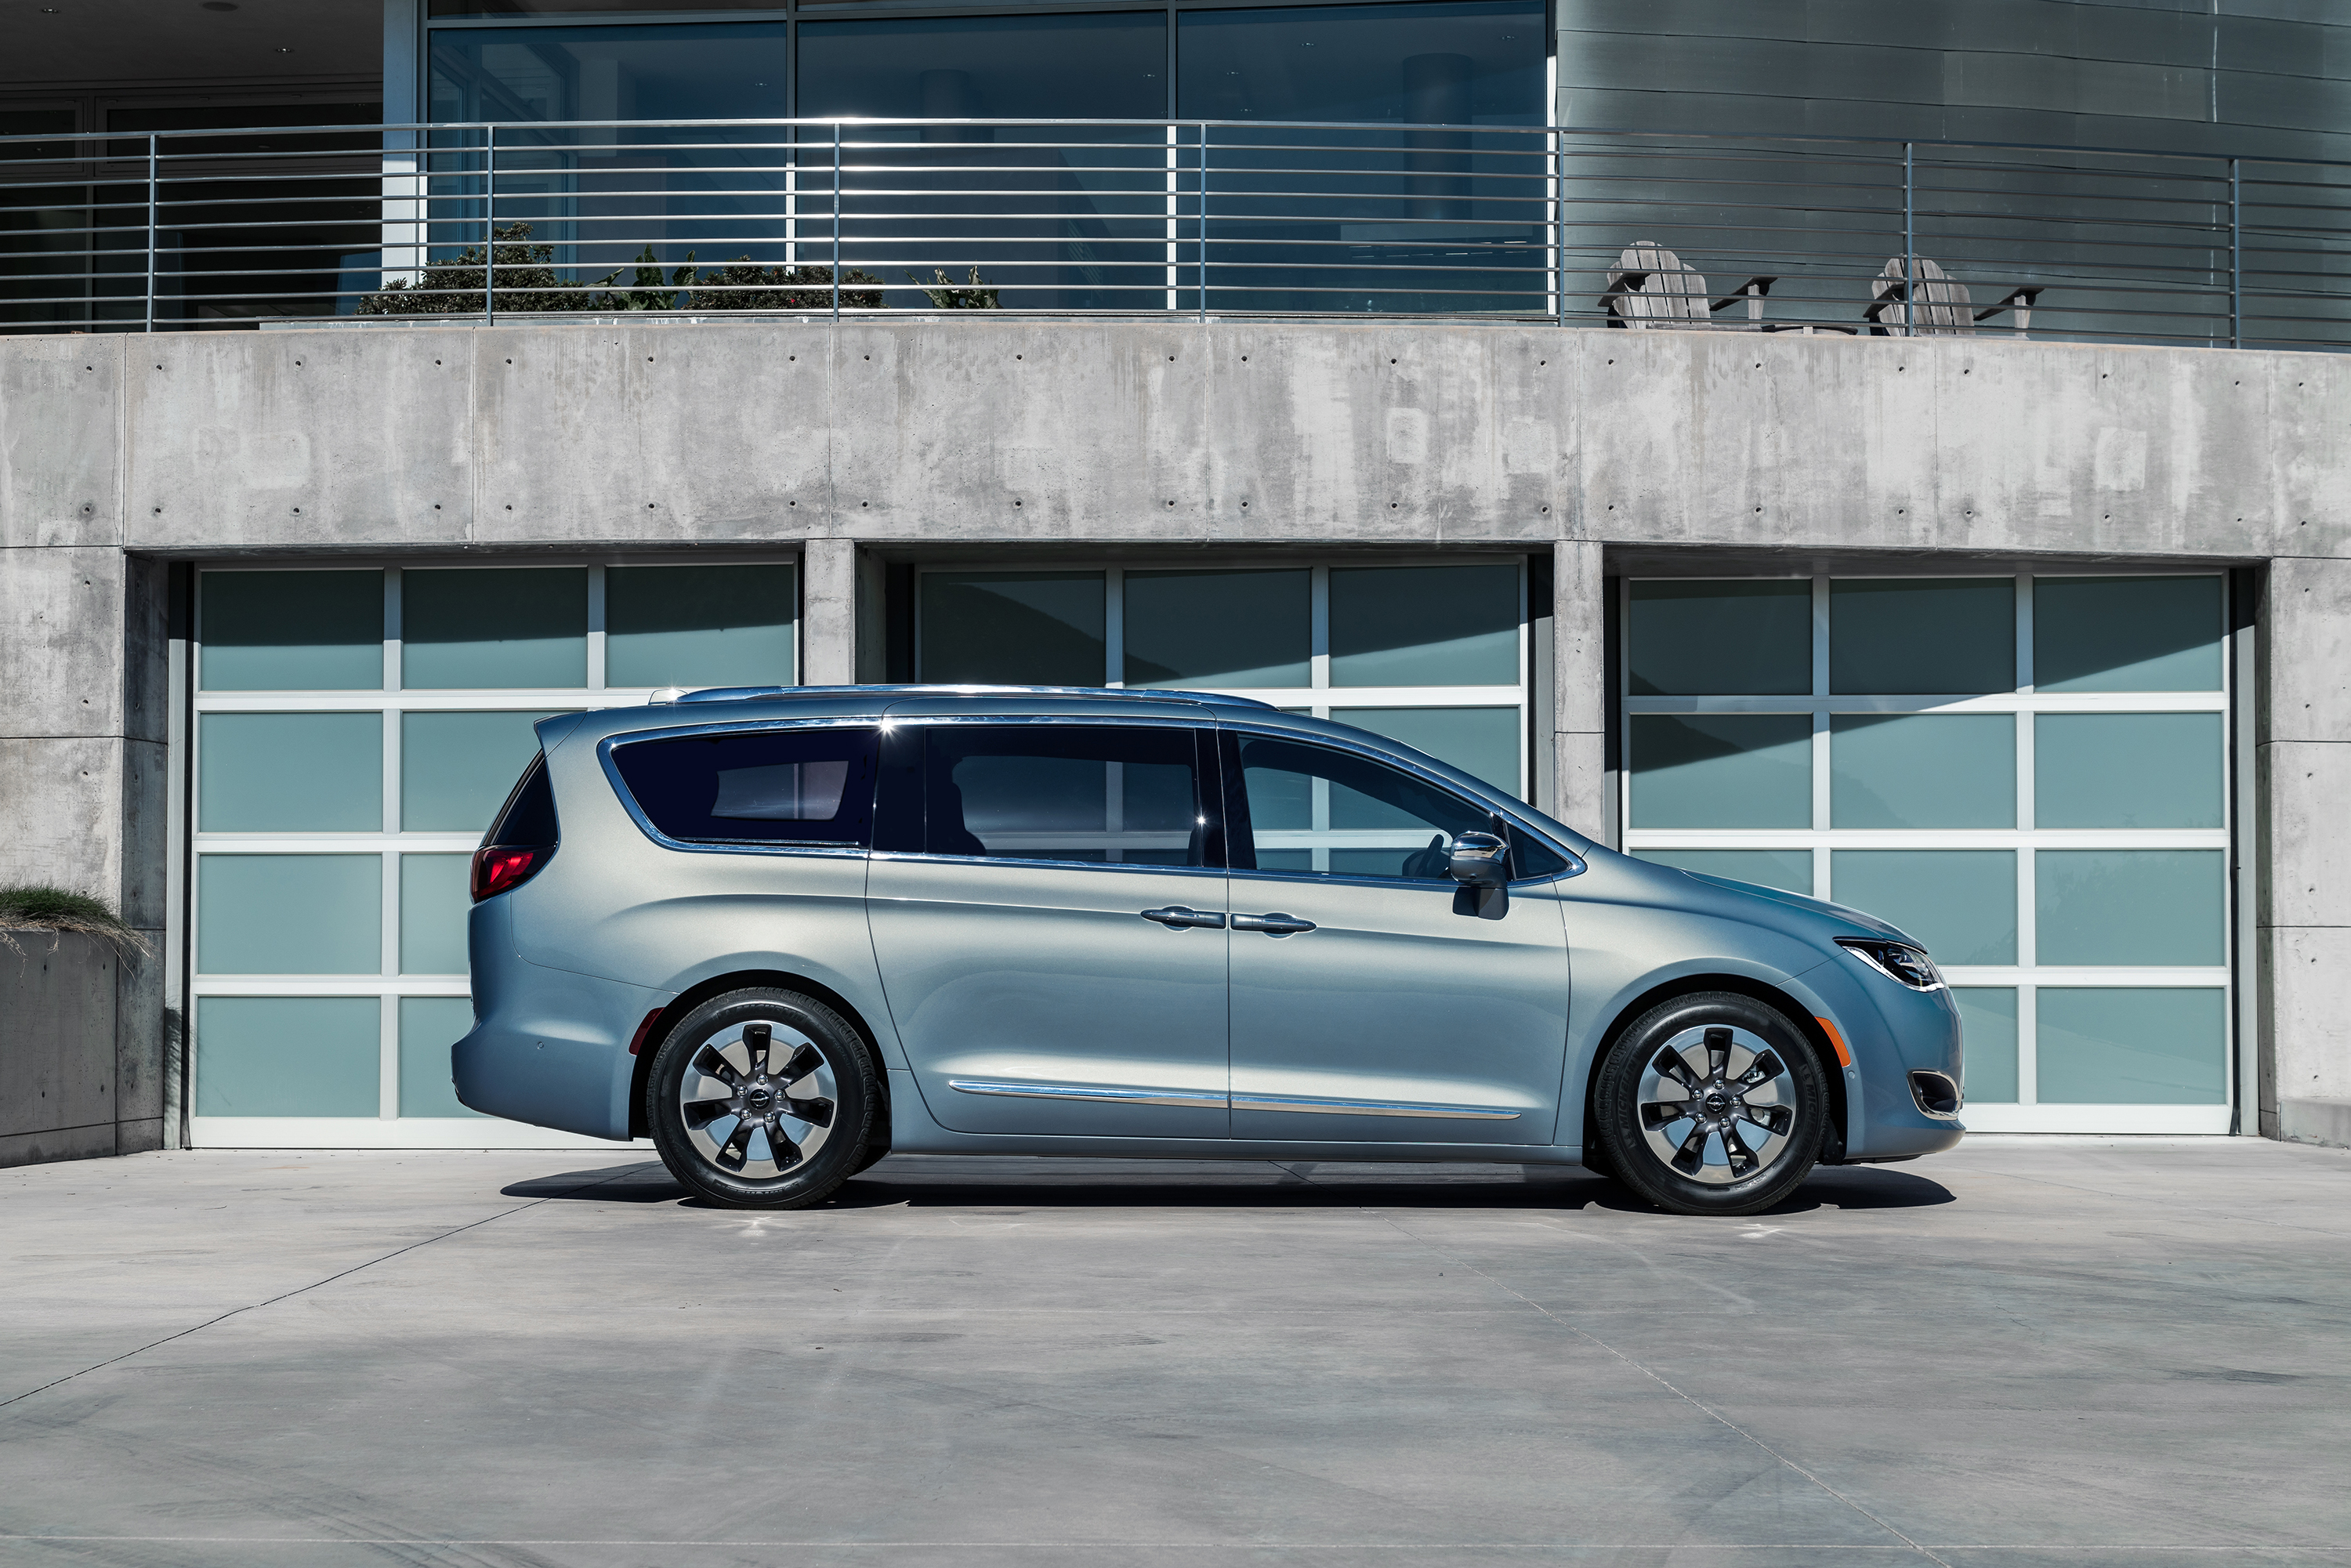 2017 Chrysler Pacifica Hybrid Review: The World’s First Electrified Minivan